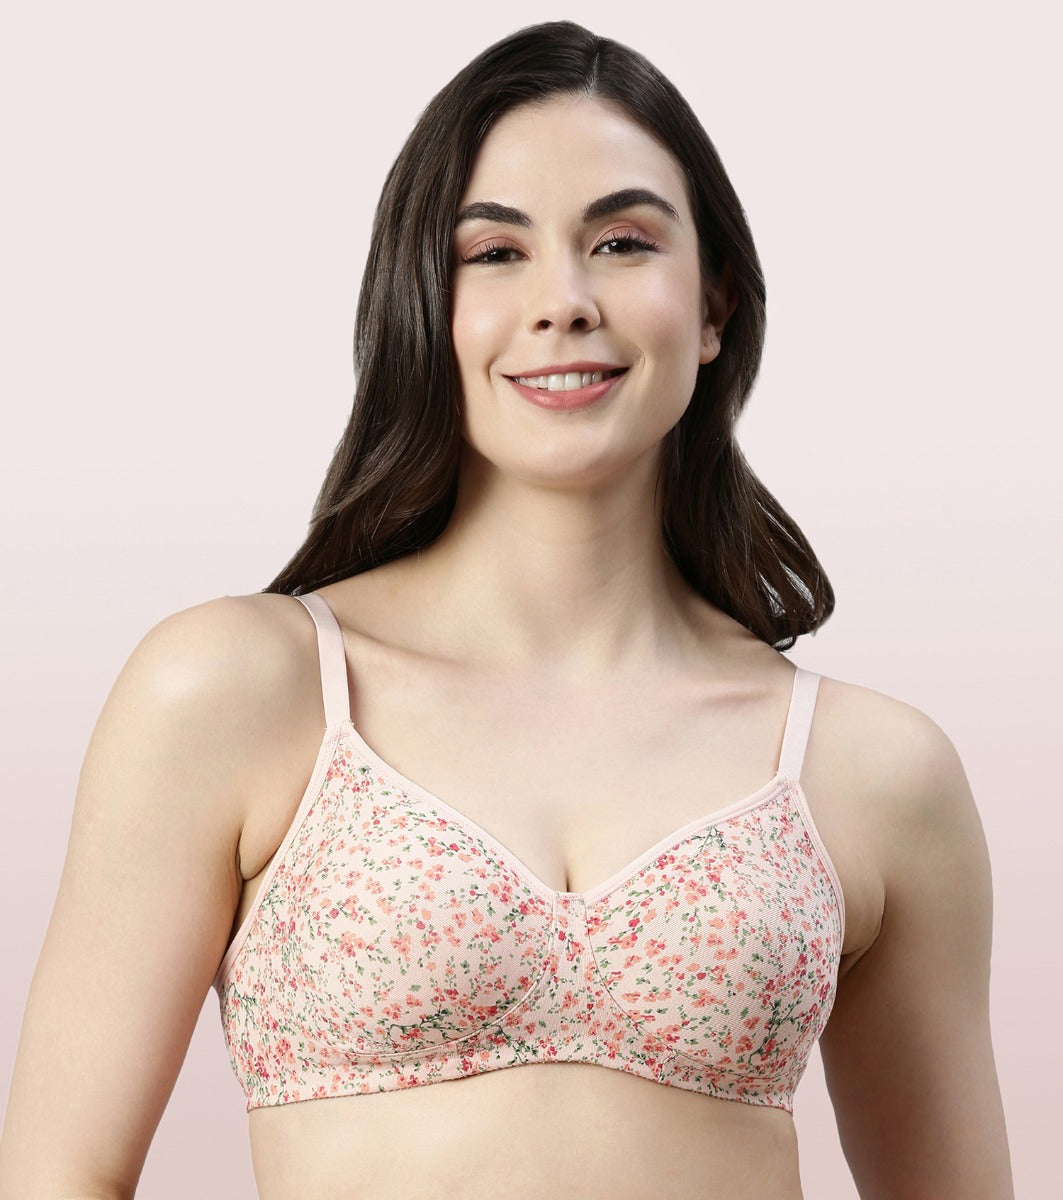 Enamor Low Impact Cotton Bra For Women - Non-Padded, Non-Wired,  High-Coverage Bra For All-Day Comfort